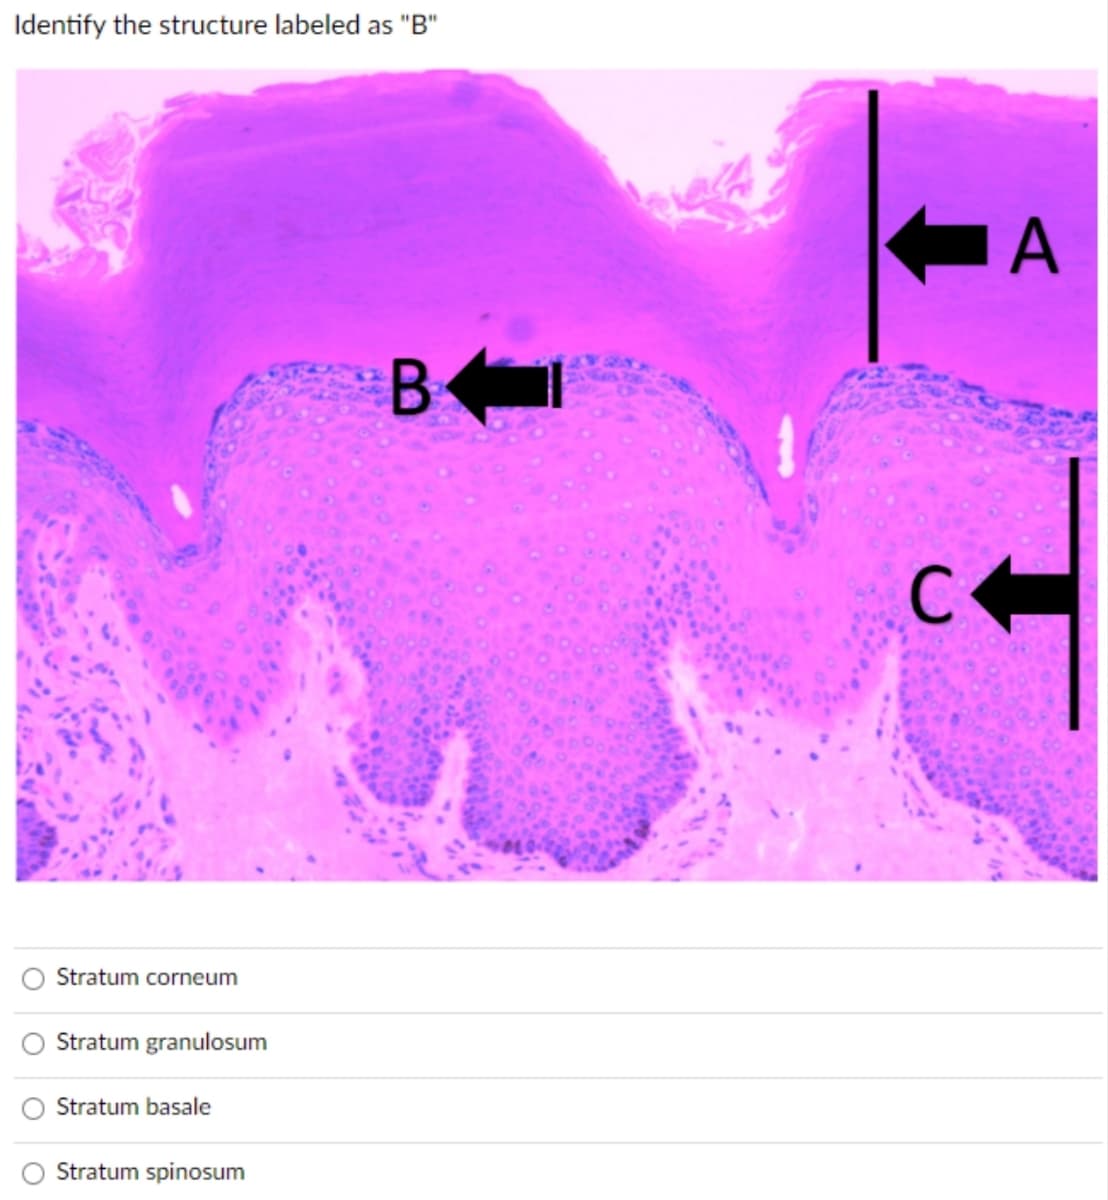 Identify the structure labeled as "B"
Stratum corneum
Stratum granulosum
Stratum basale
Stratum spinosum
B-
C
A